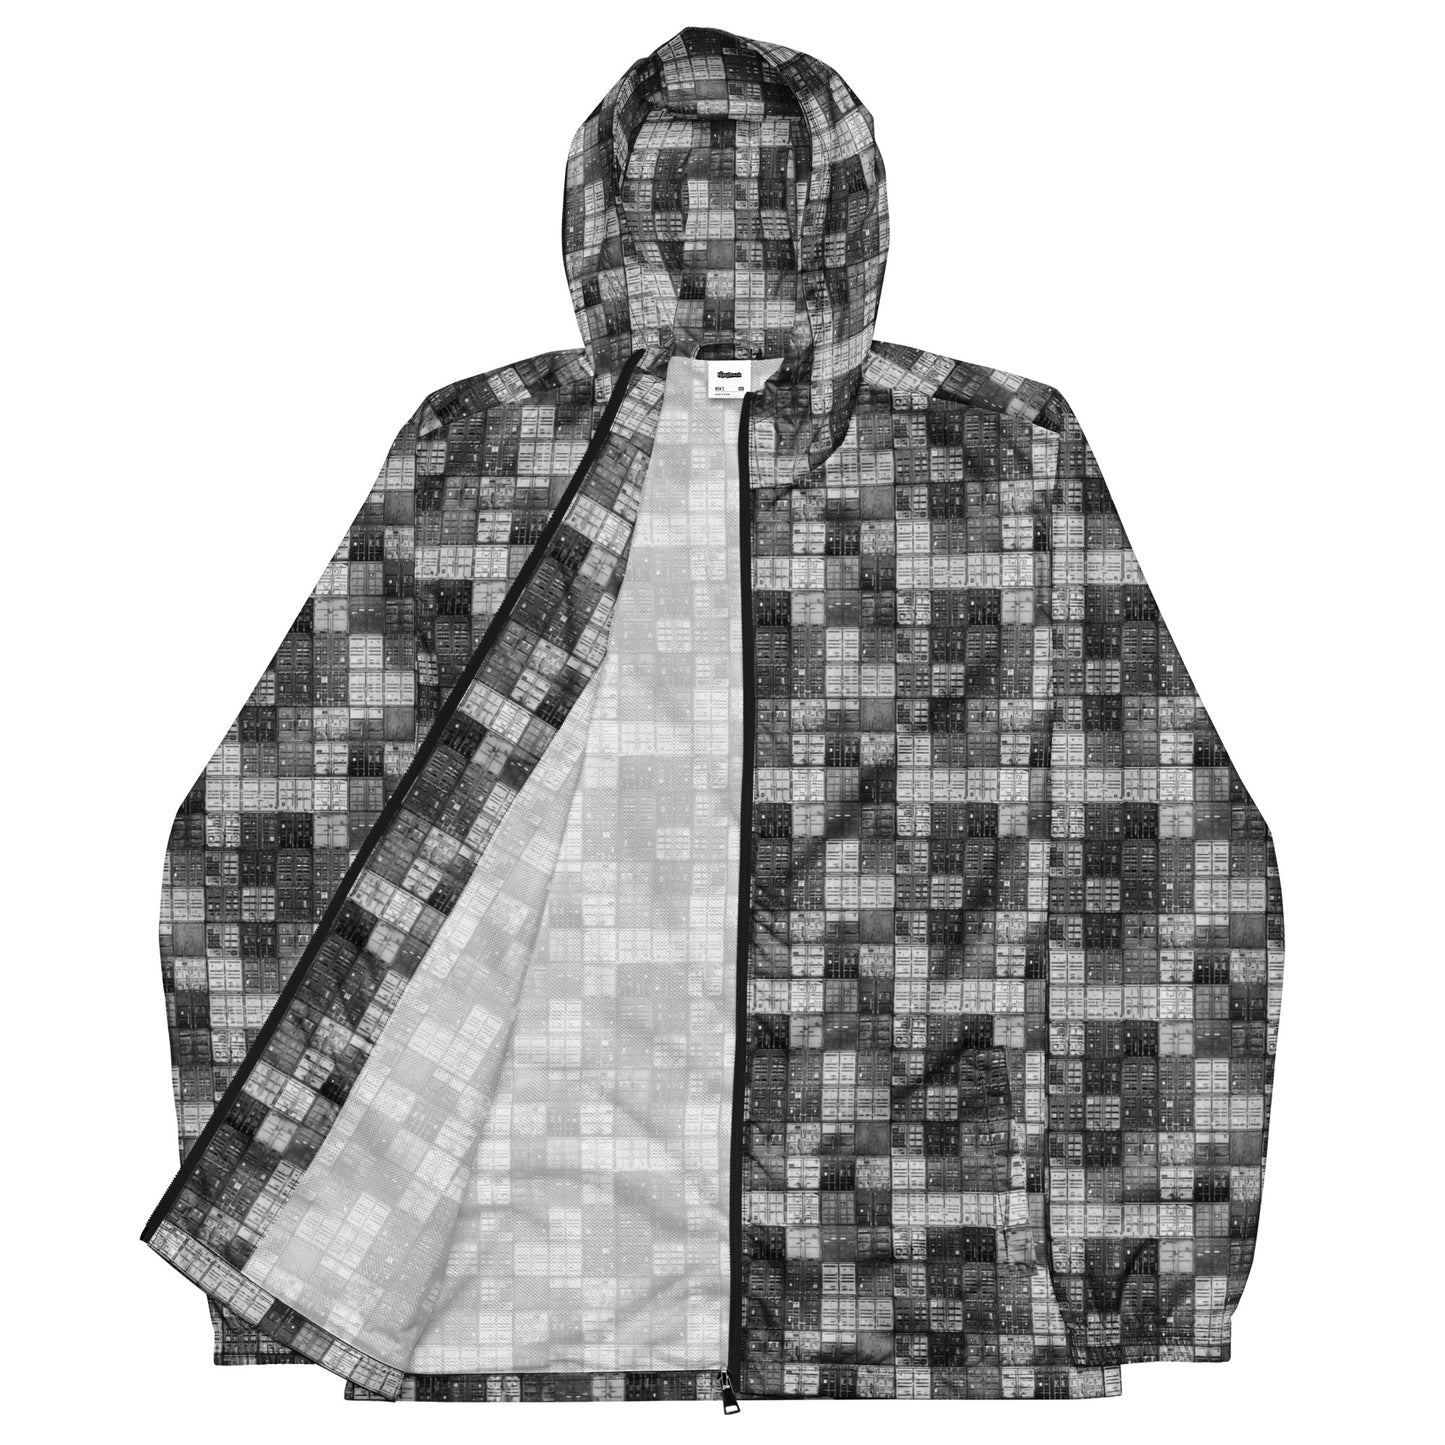 "Mono Shipping Containers" Windbreaker